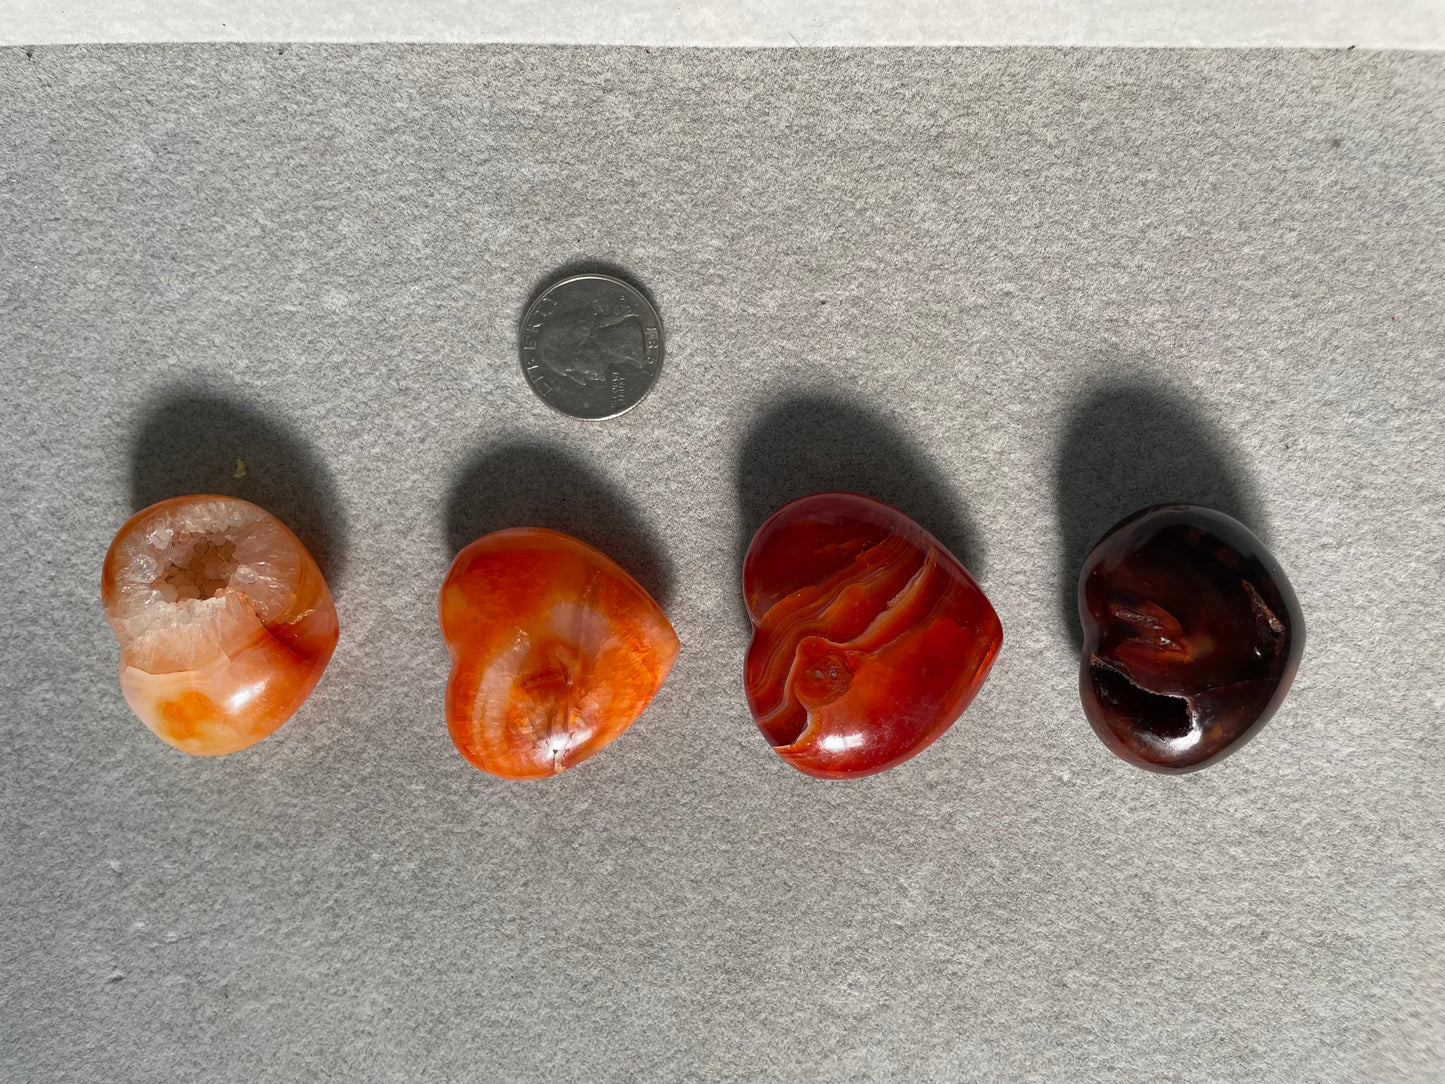 Carnelian Heart Palmstone 4-pc Set / Motivation, Stamina + Passion / $50 for collection